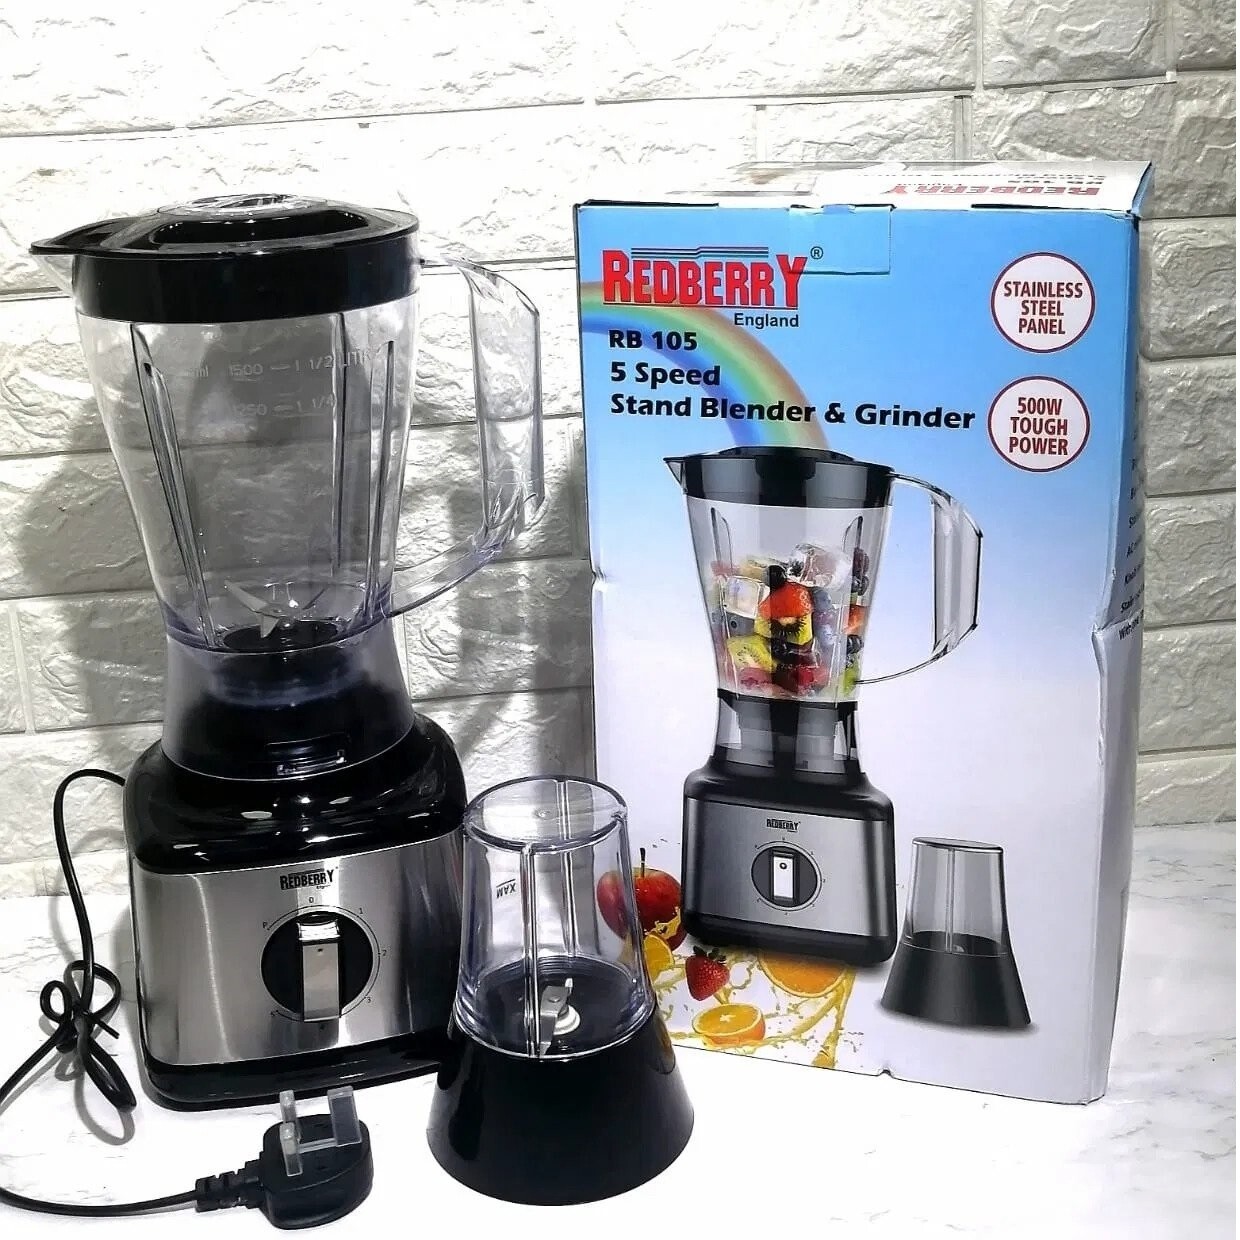 RedBerry Blender and Grinder RB105. 5 speed stand blender and grinder. 500W crushing power